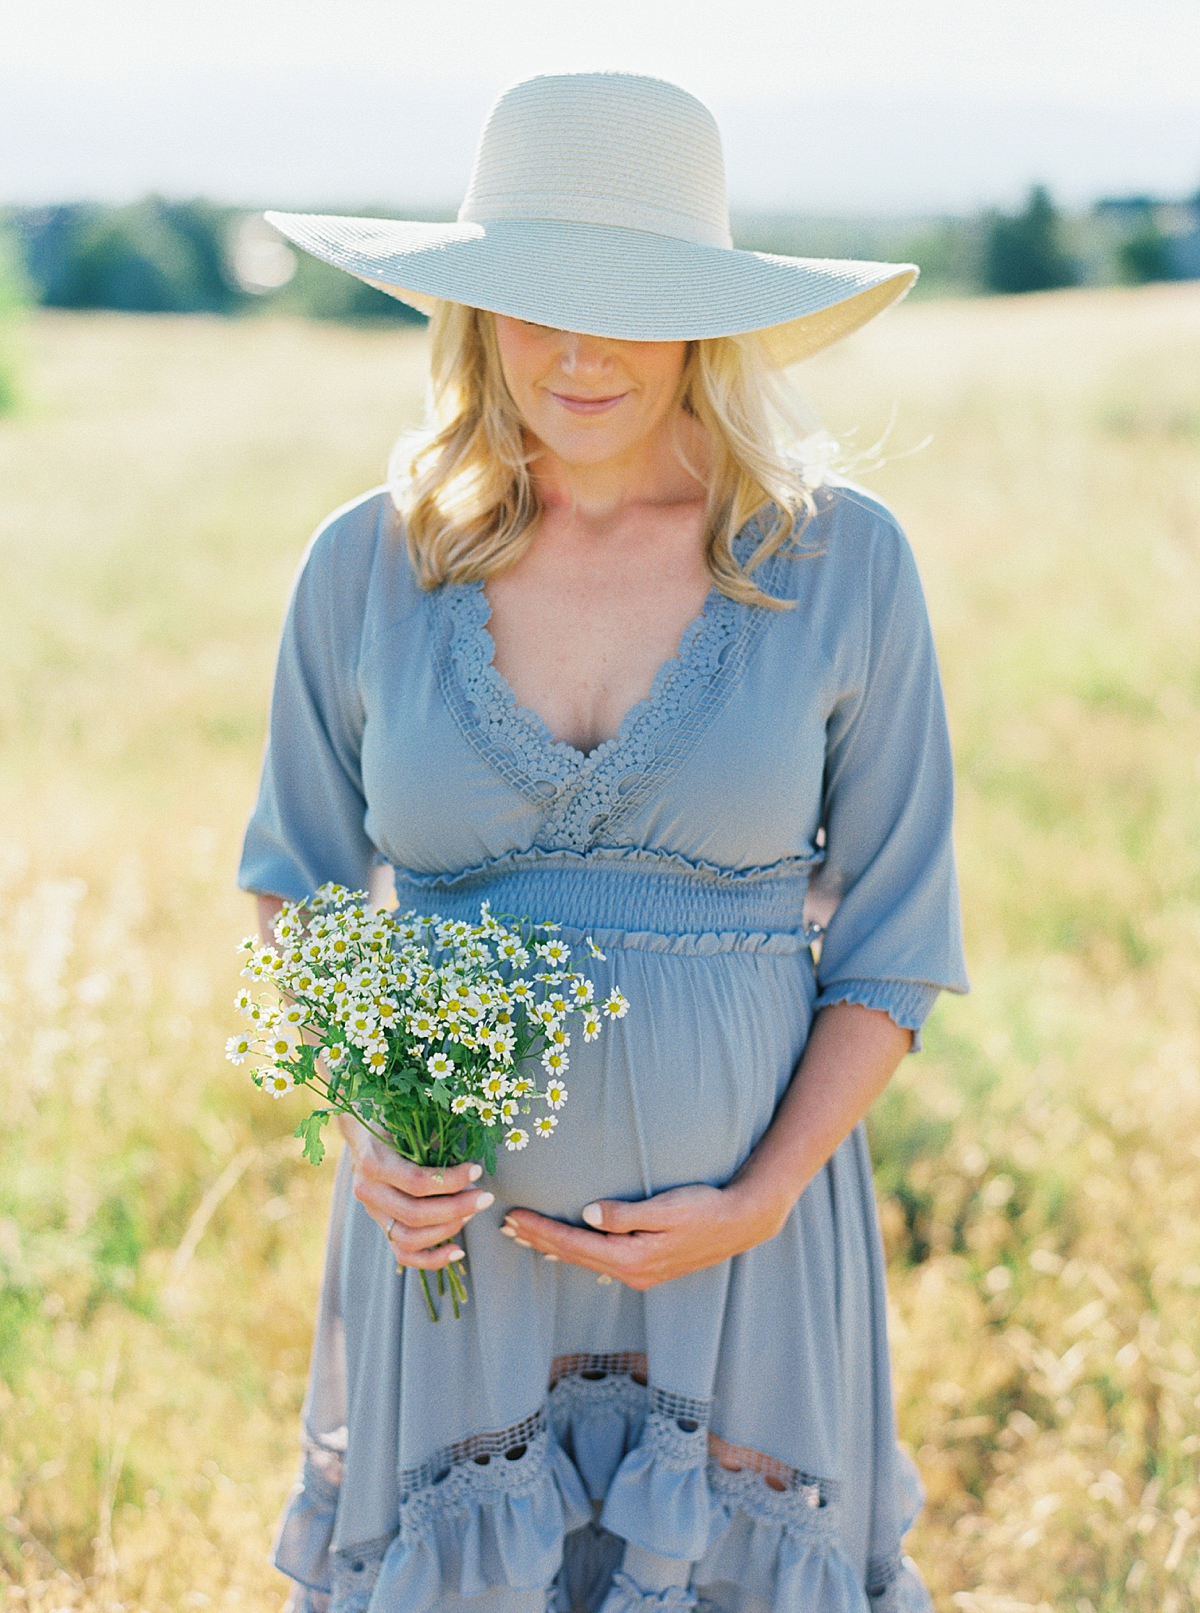 An expecting mom wears a straw hat and holds a bouquet of wildflowers in a field.